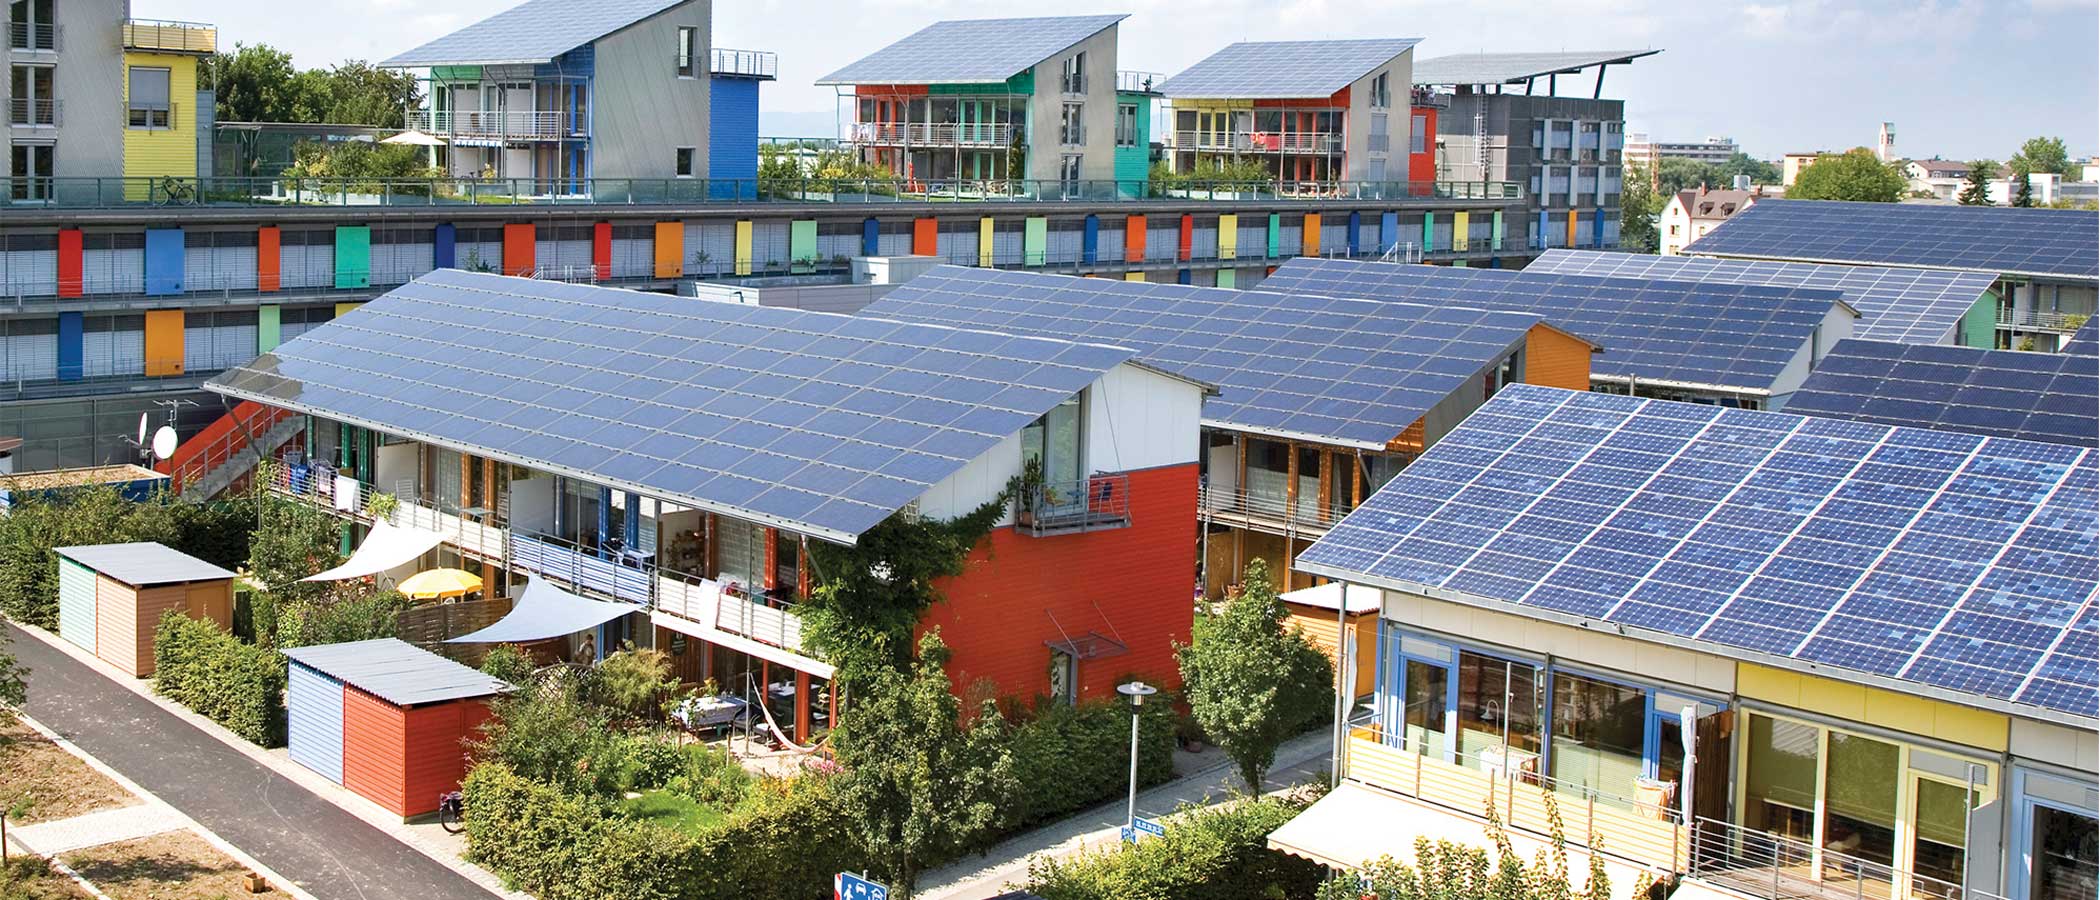 Solar Settlement, a 59-home community in Freiburg, Germany.